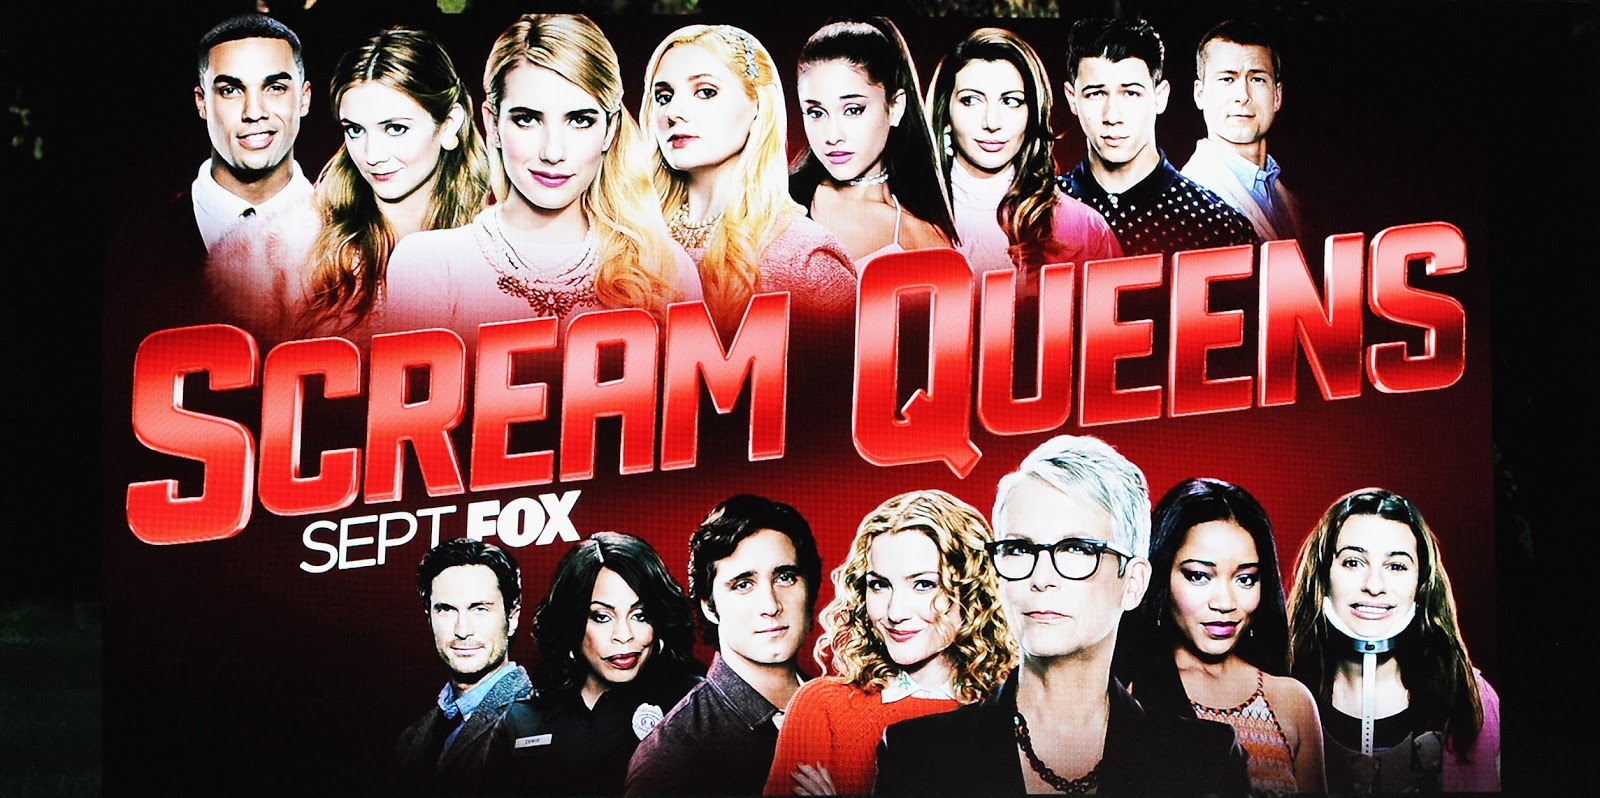 Image Scream Queens Tv Show Pc Android iPhone And iPad Wallpaper